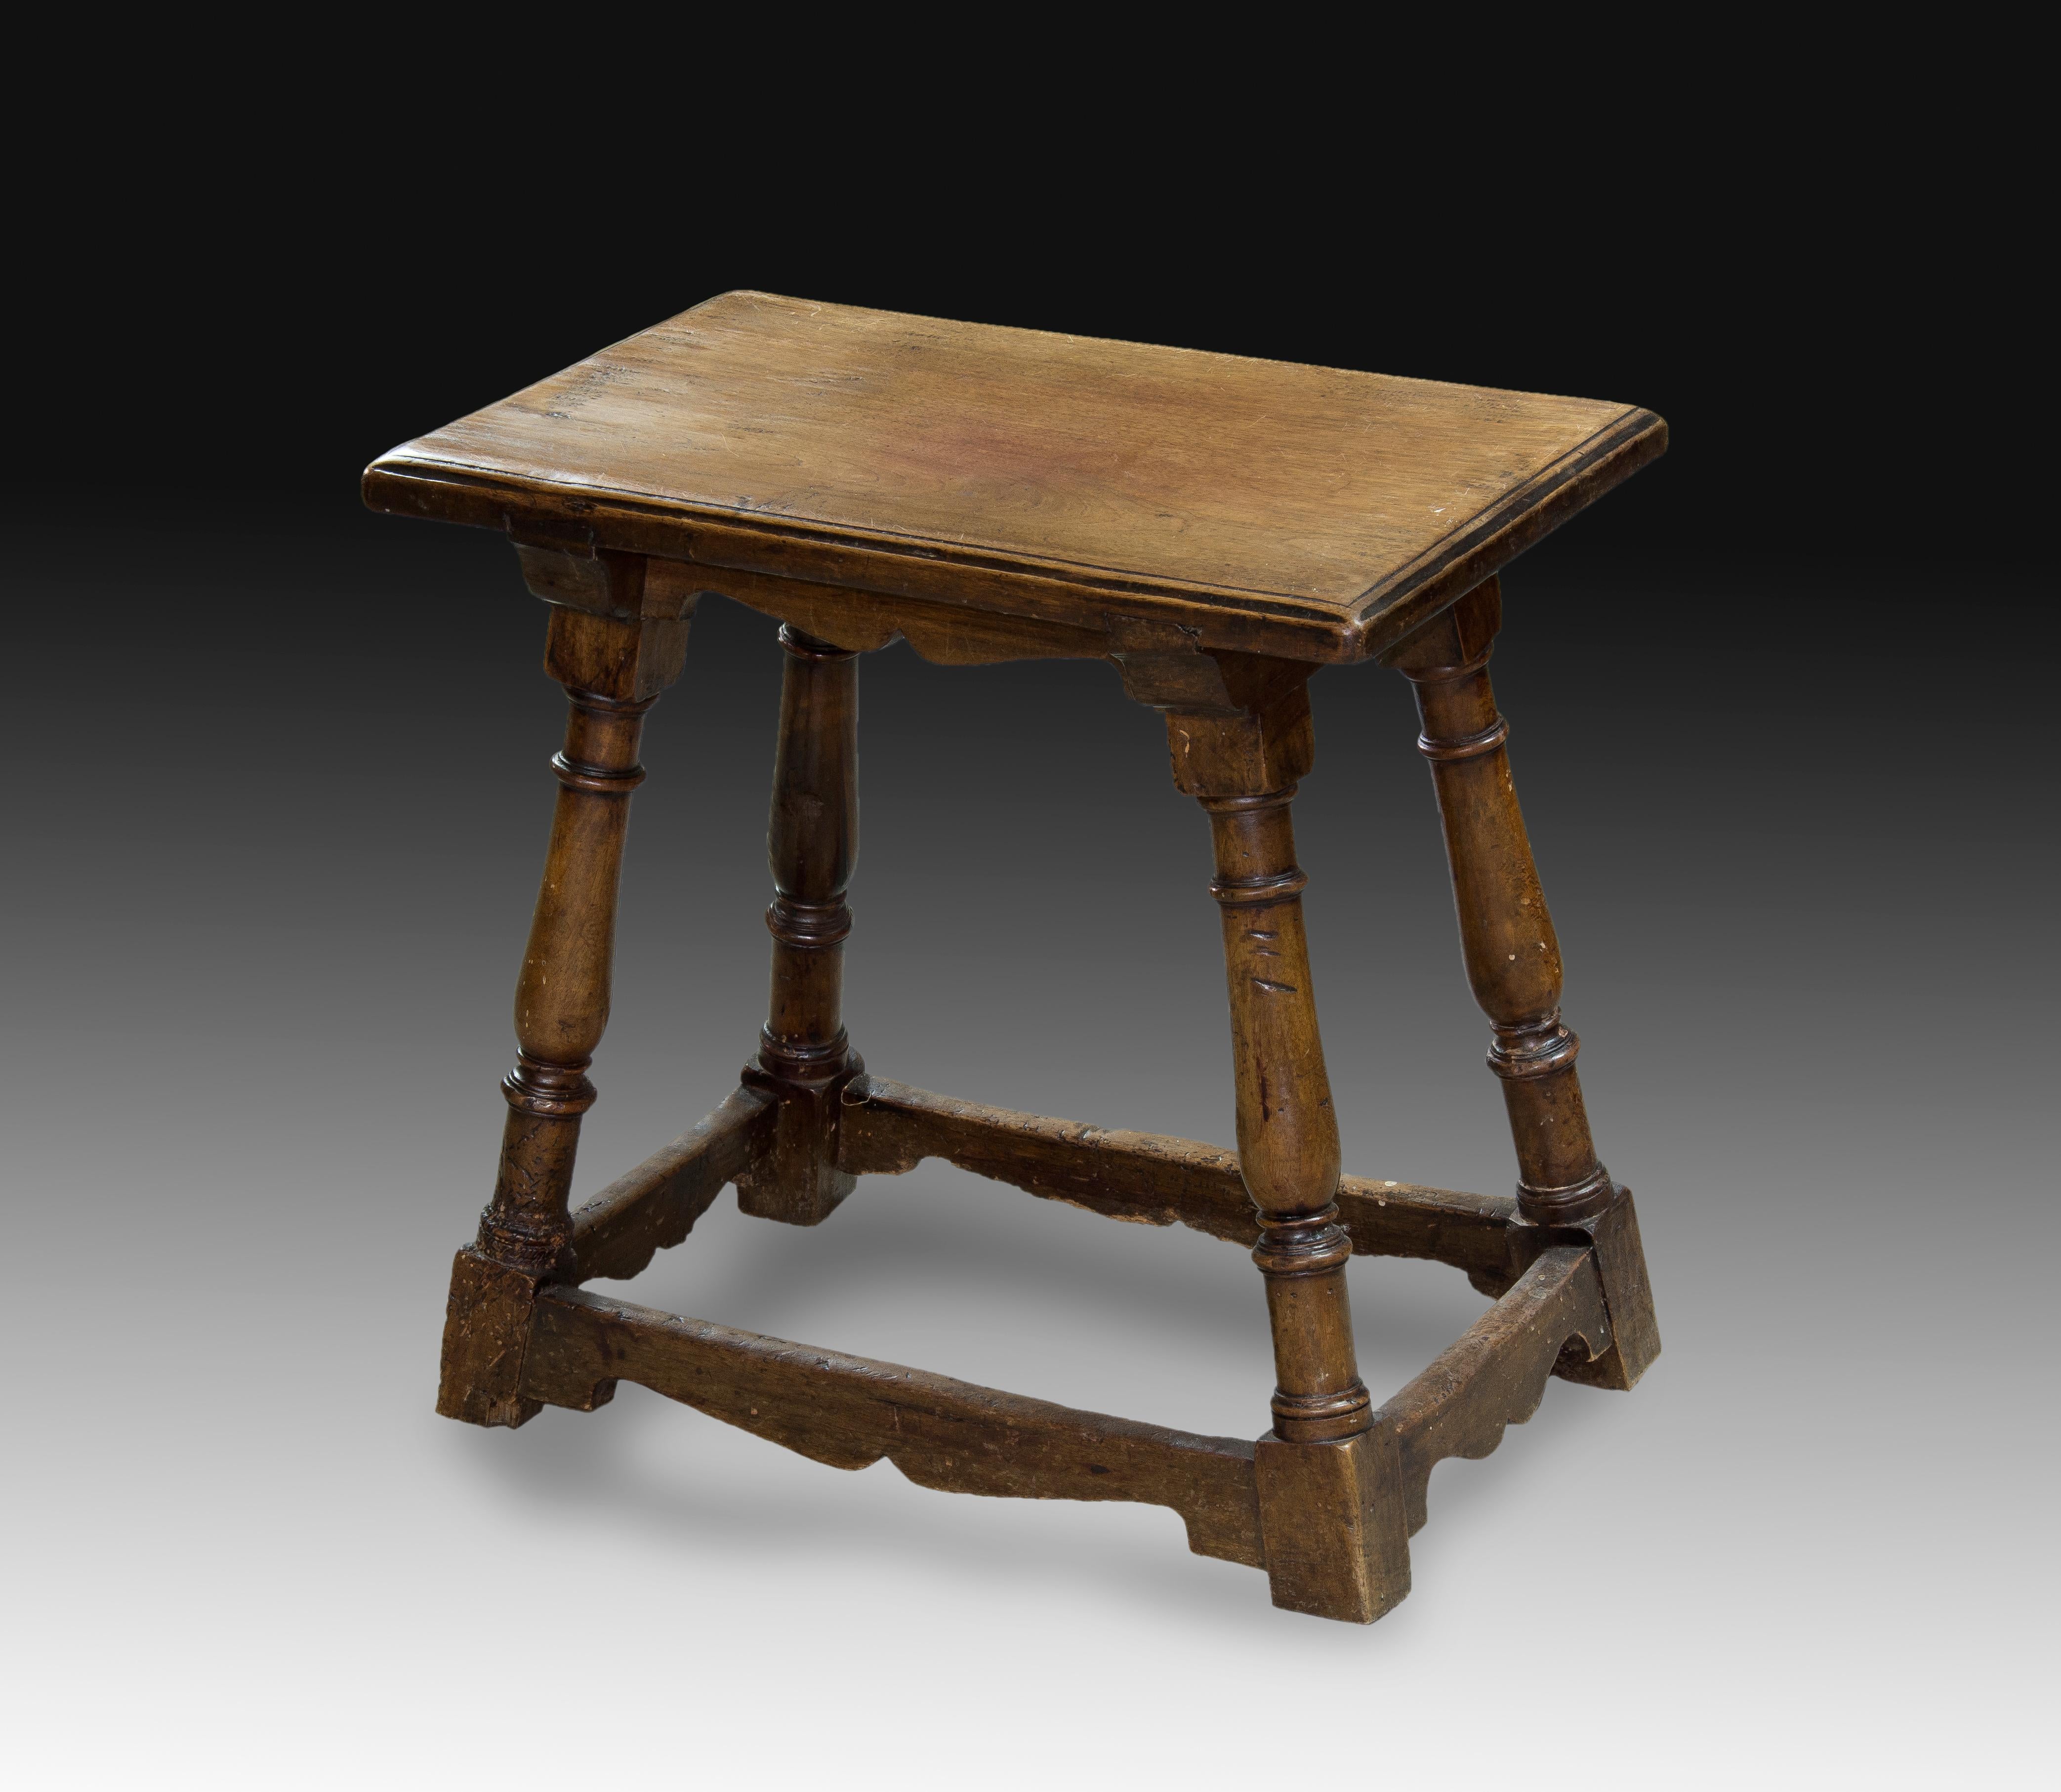 Sidewalk. Walnut wood. Century XVIII. 
Rectangular board stool with smooth molding on the edge and turned legs in the shape of balusters, which are secured in the lower area by trimmed profile chambranes in the lower part. It presents classicist